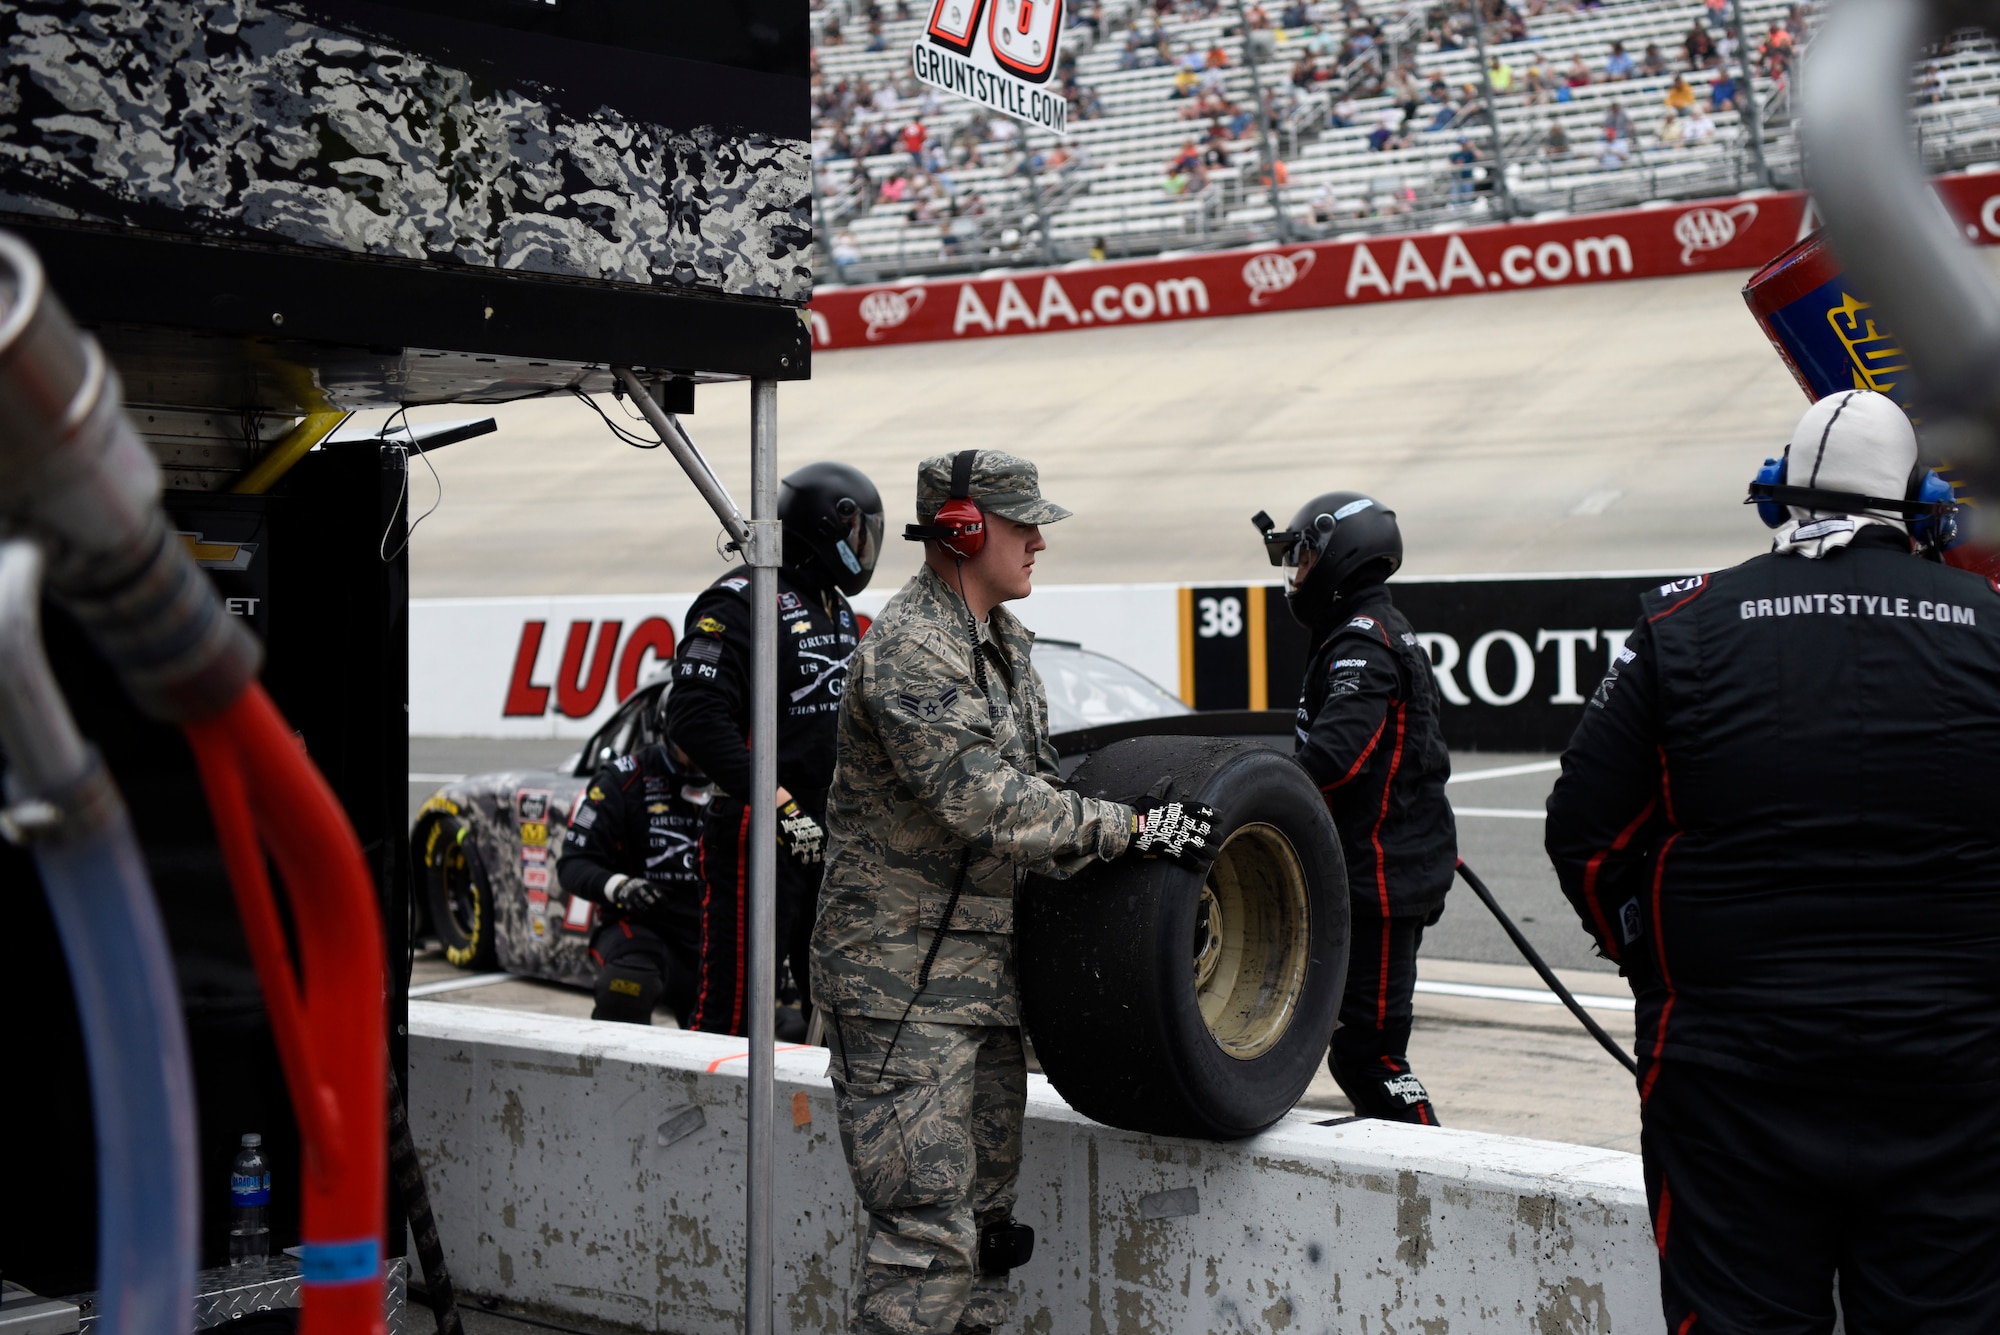 Airman 1st Class Lance Kielbaso, 436th Maintenance Squadron metals technician apprentice, watches a race as an honorary pit crew member for Spencer Boyd, driver of the No. 76 SS Green Light Racing Chevrolet Camaro car, during the “OneMain Financial 200” NASCAR XFINITY Series Dash 4 Cash Race May 5, 2018, at Dover International Speedway, Del. Kielbaso helped the crew with a tire change during a pit stop. (U.S. Air Force photo by Airman 1st Class Zoe M. Wockenfuss)